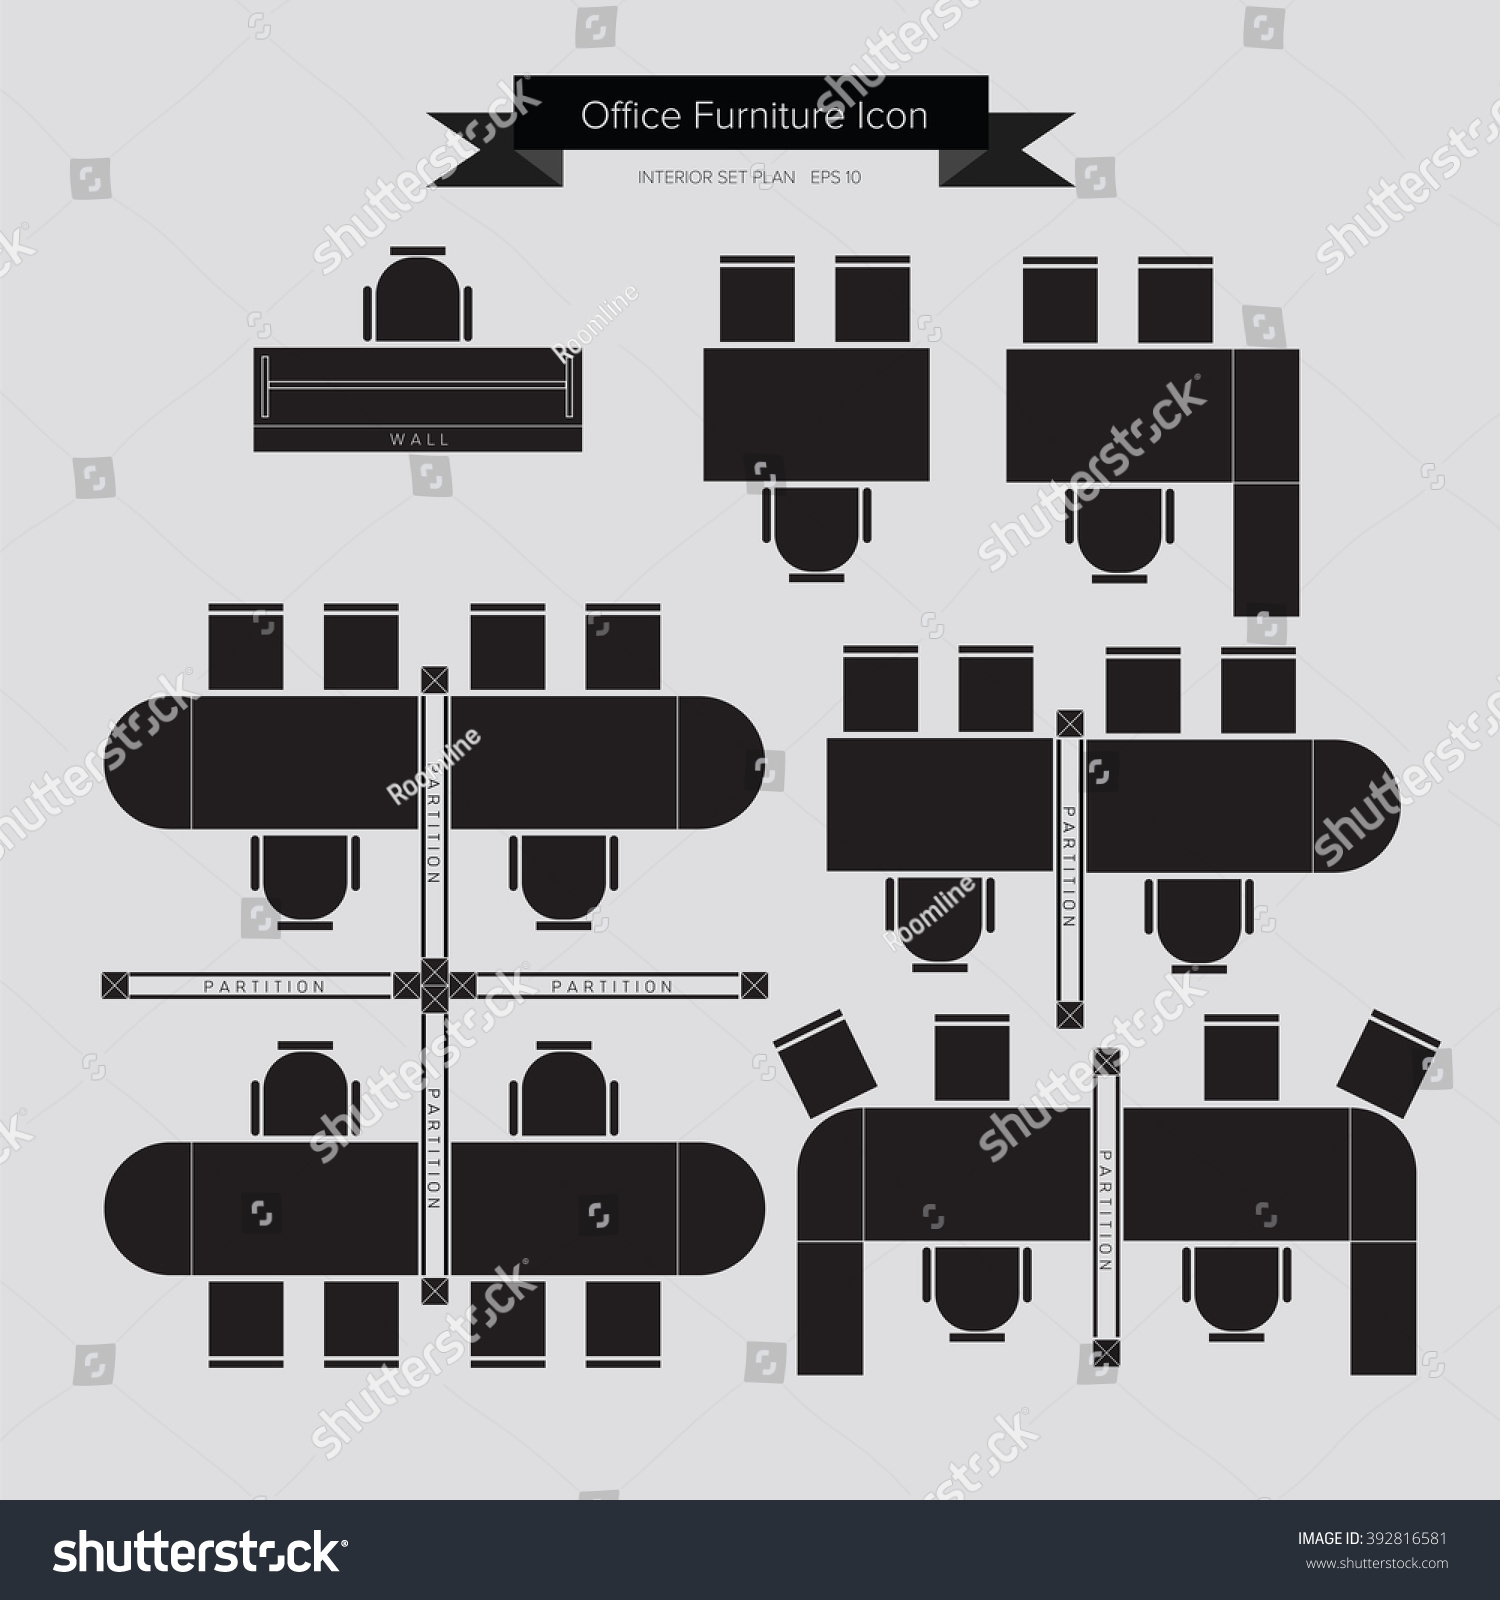 Office Furniture Icon Top View Interior Stock Vector 